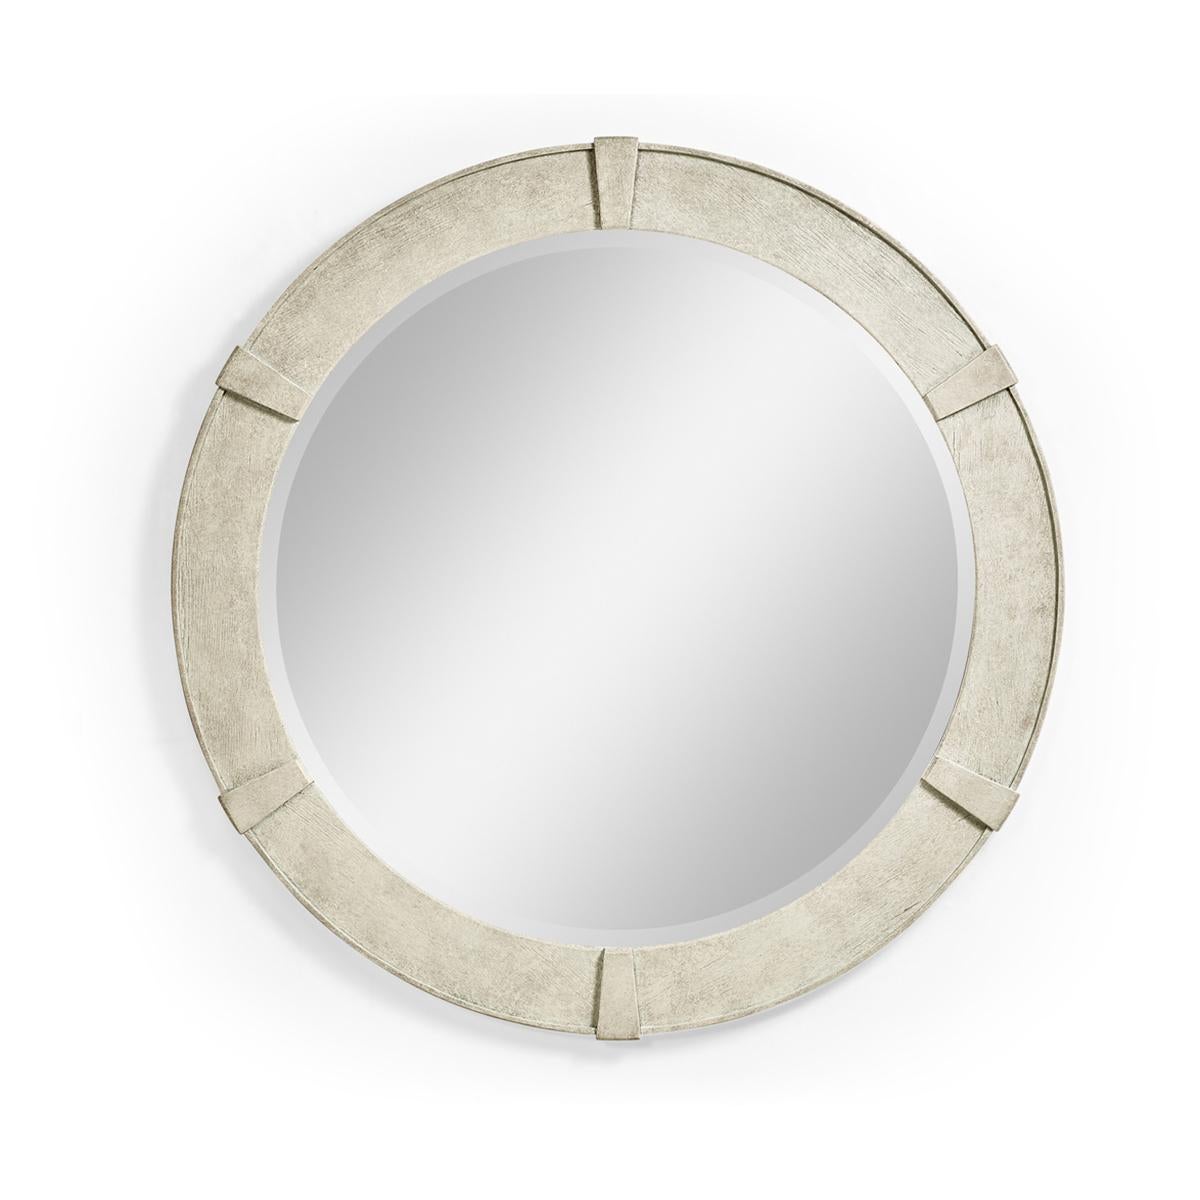 Modern Whitewash round mirror, the small circular mirror in a whitewash driftwood finish with contemporary relief carved detail and a plain beveled mirror glass.

Dimensions: 35 7/8